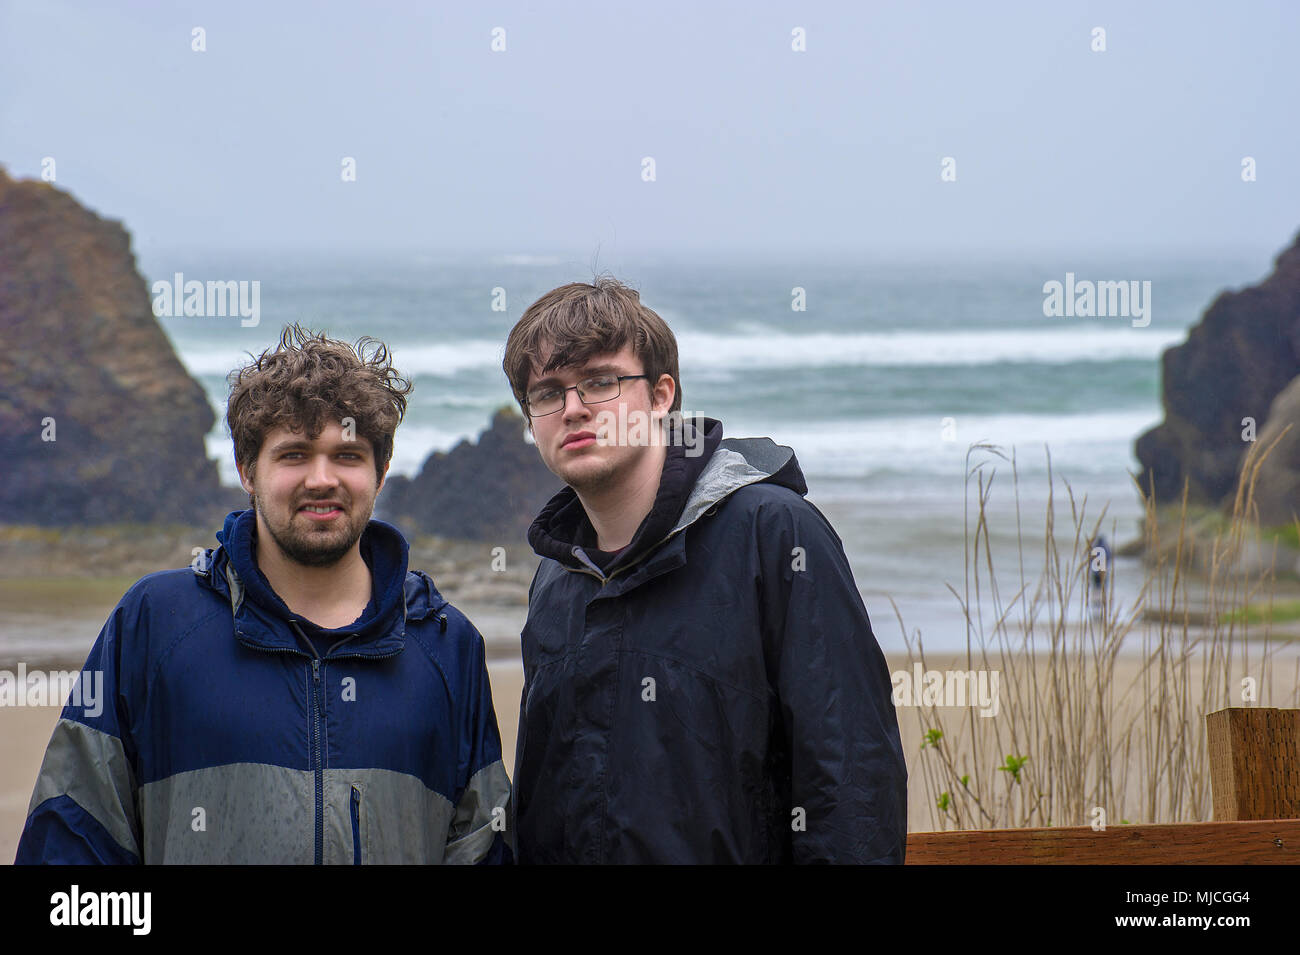 Two brothers pose, in the rain, for camera before heading out on  Arcadia beach seen in the background on the Oregon Coast Stock Photo